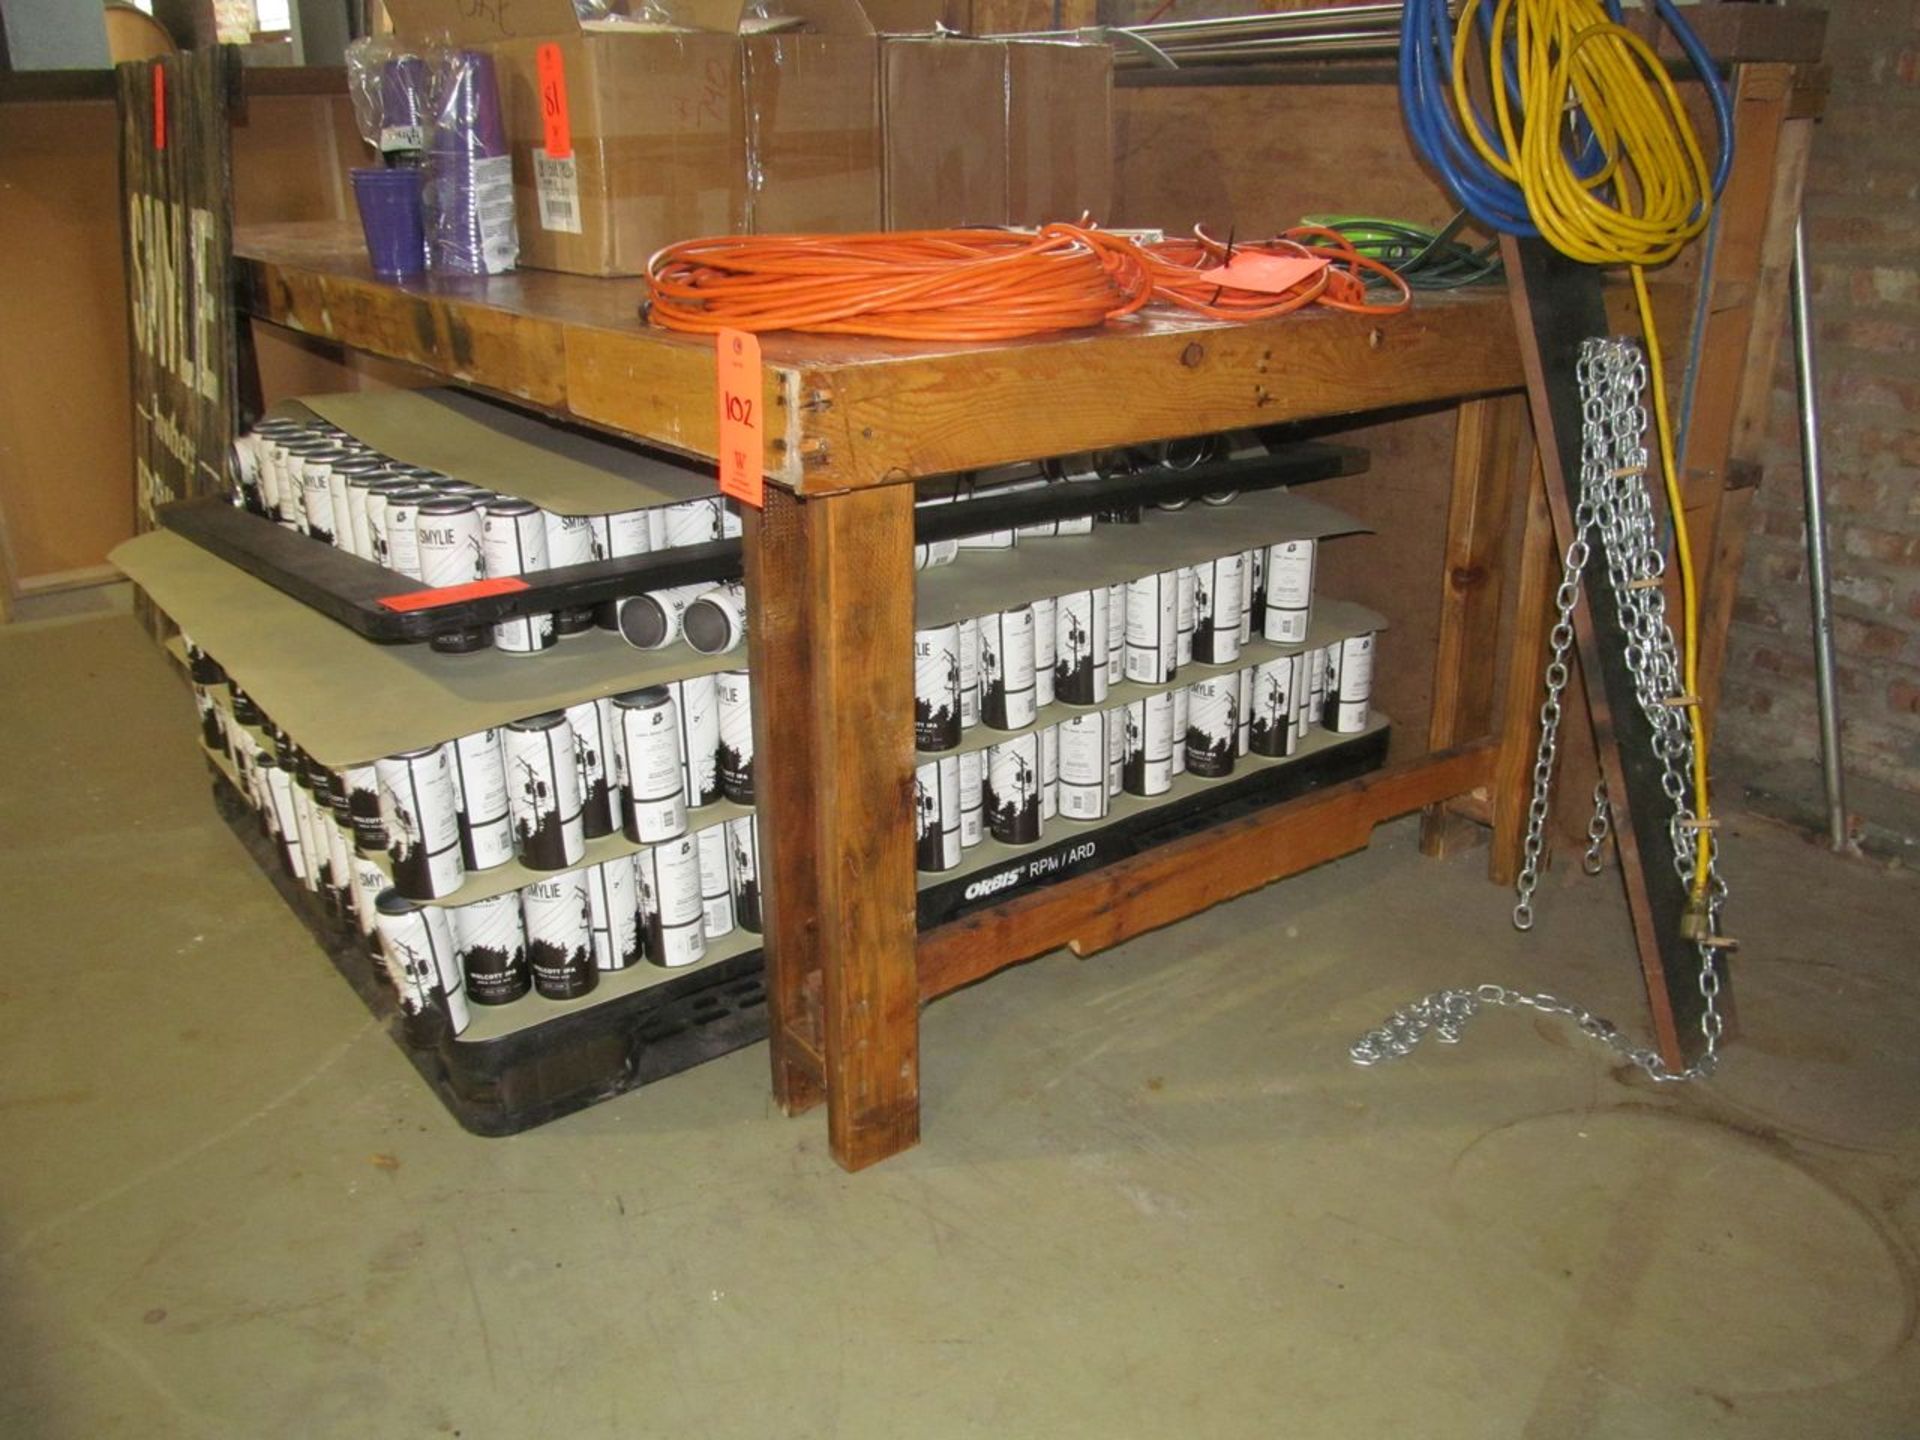 Lot - 8 ft. Folding Table, Portable 3-Tier Cart, 8 ft. x 4 ft. Wood Work Bench Table, (1) L-Shaped - Image 2 of 3